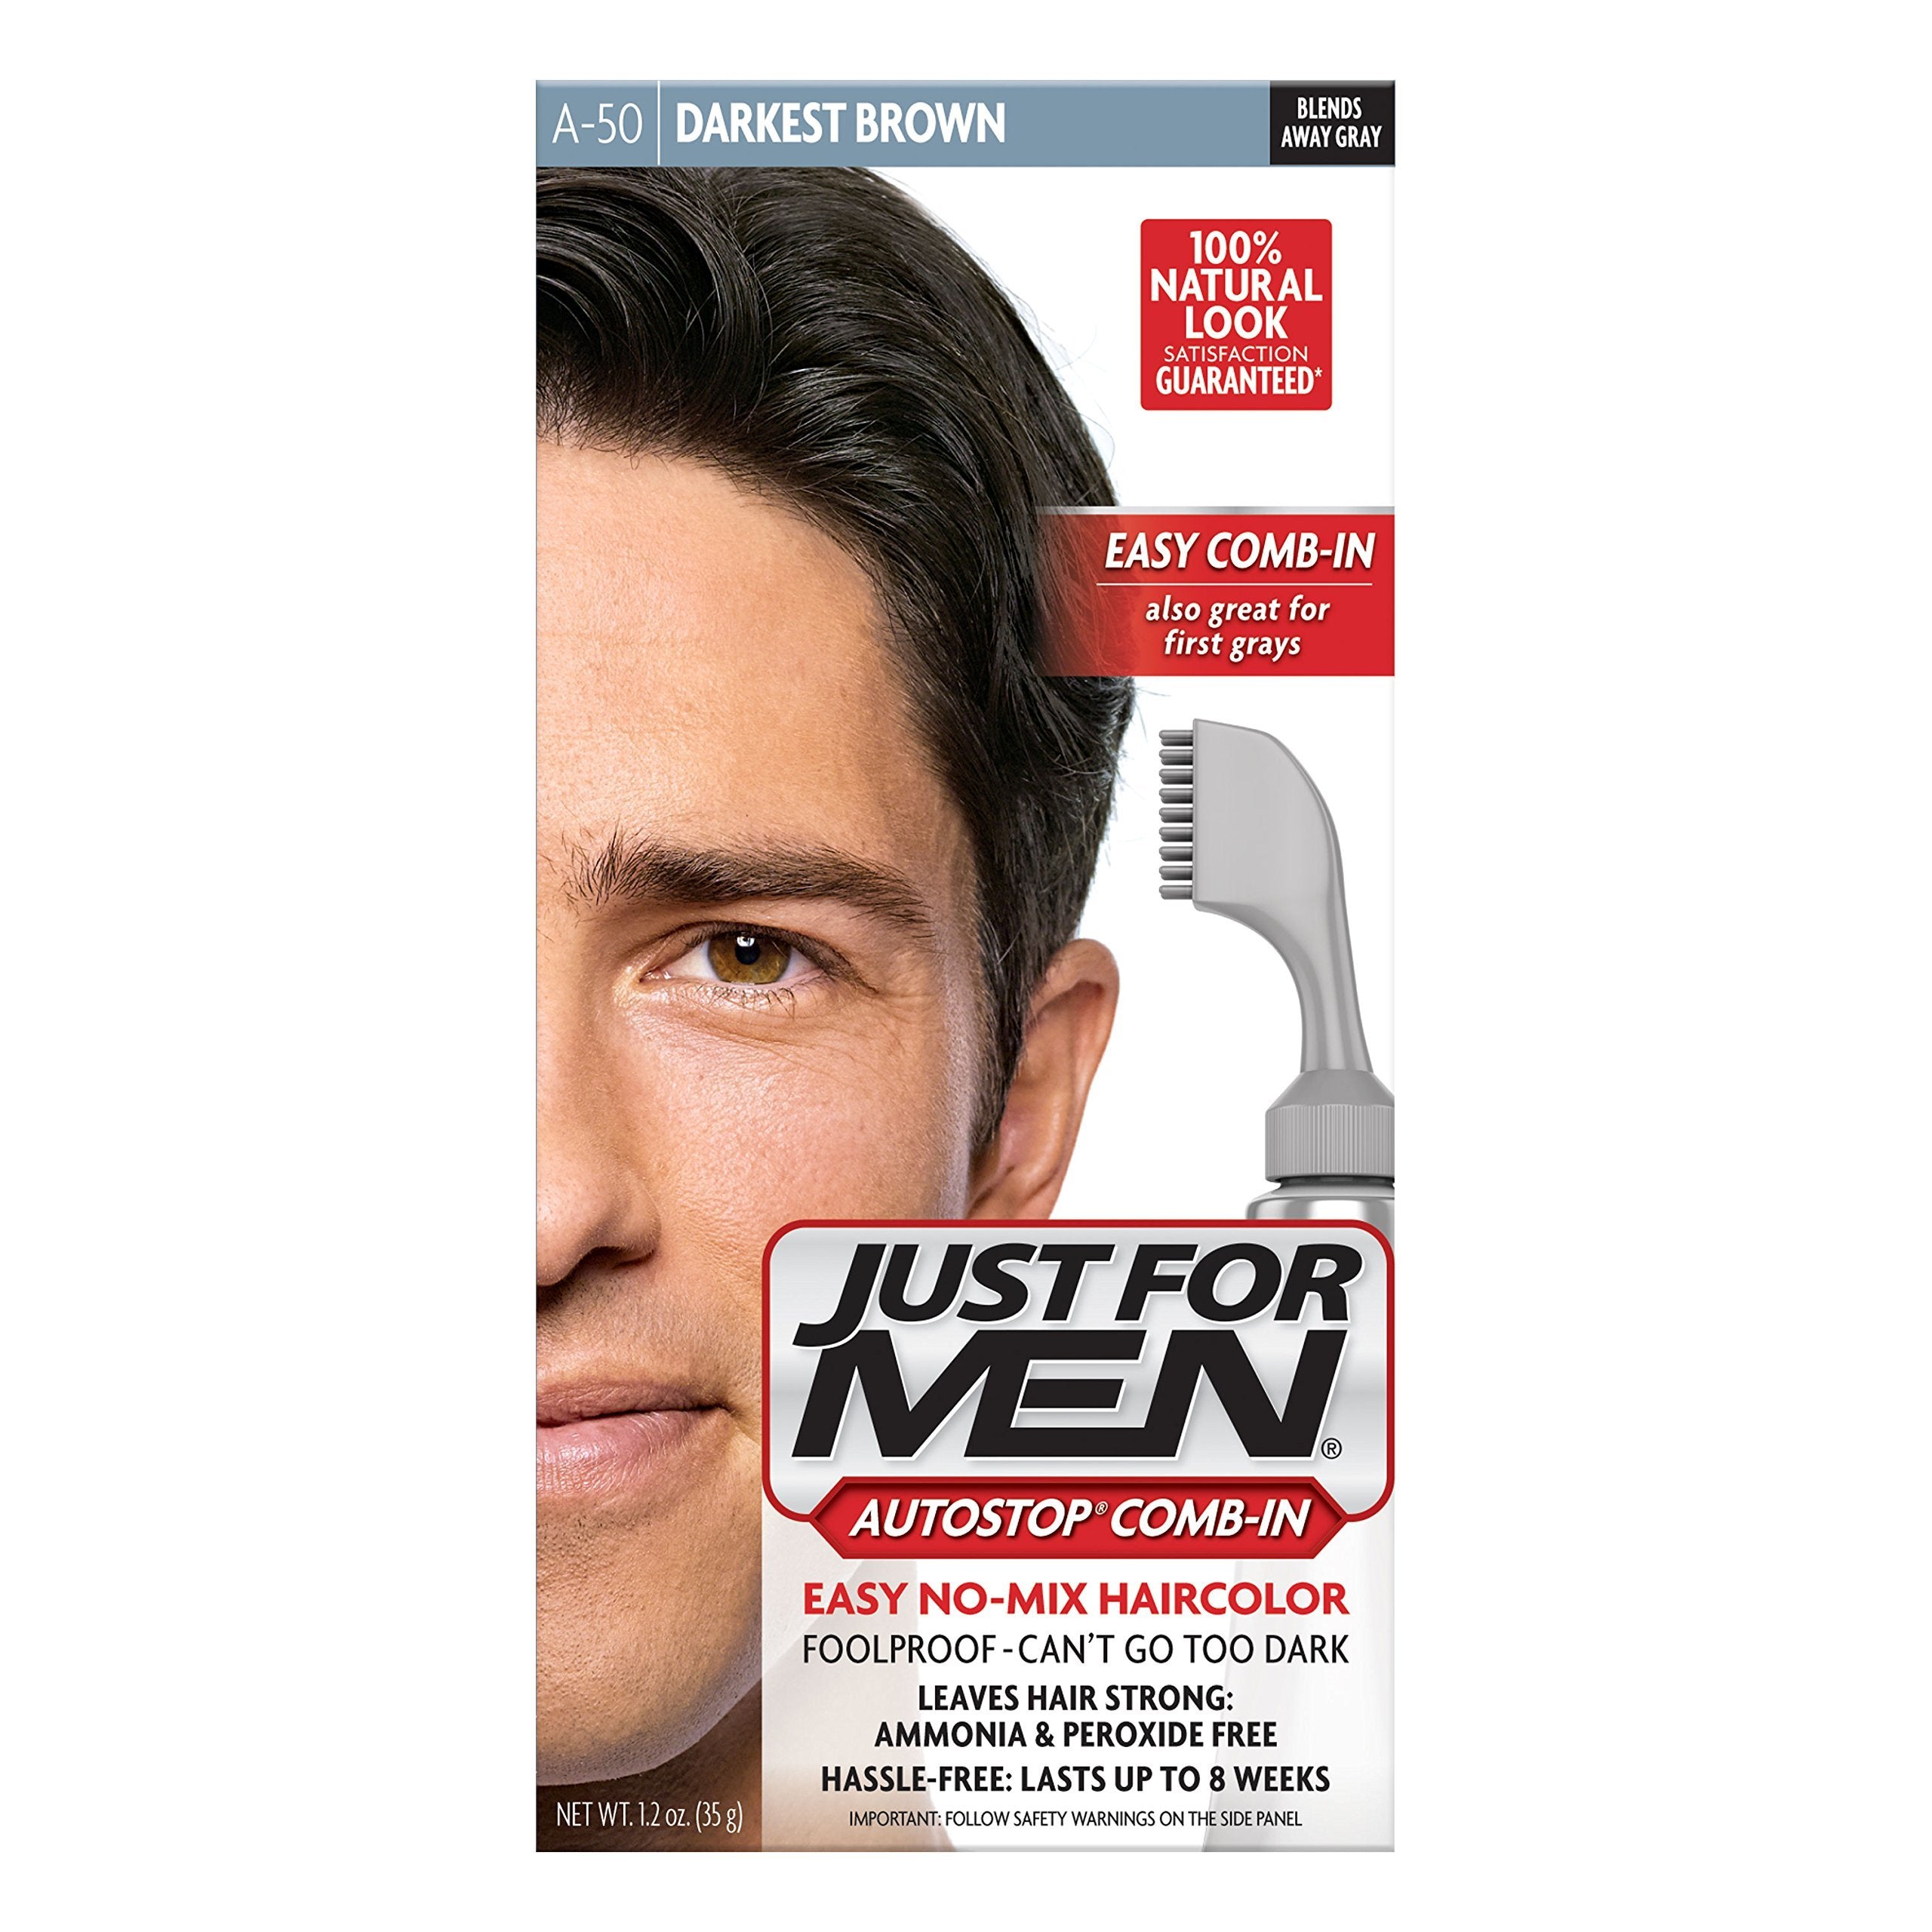 4th Ave Market: Just For Men Auto Stop Hair Color Darkest Brown Hair Color for Men, 1 Application